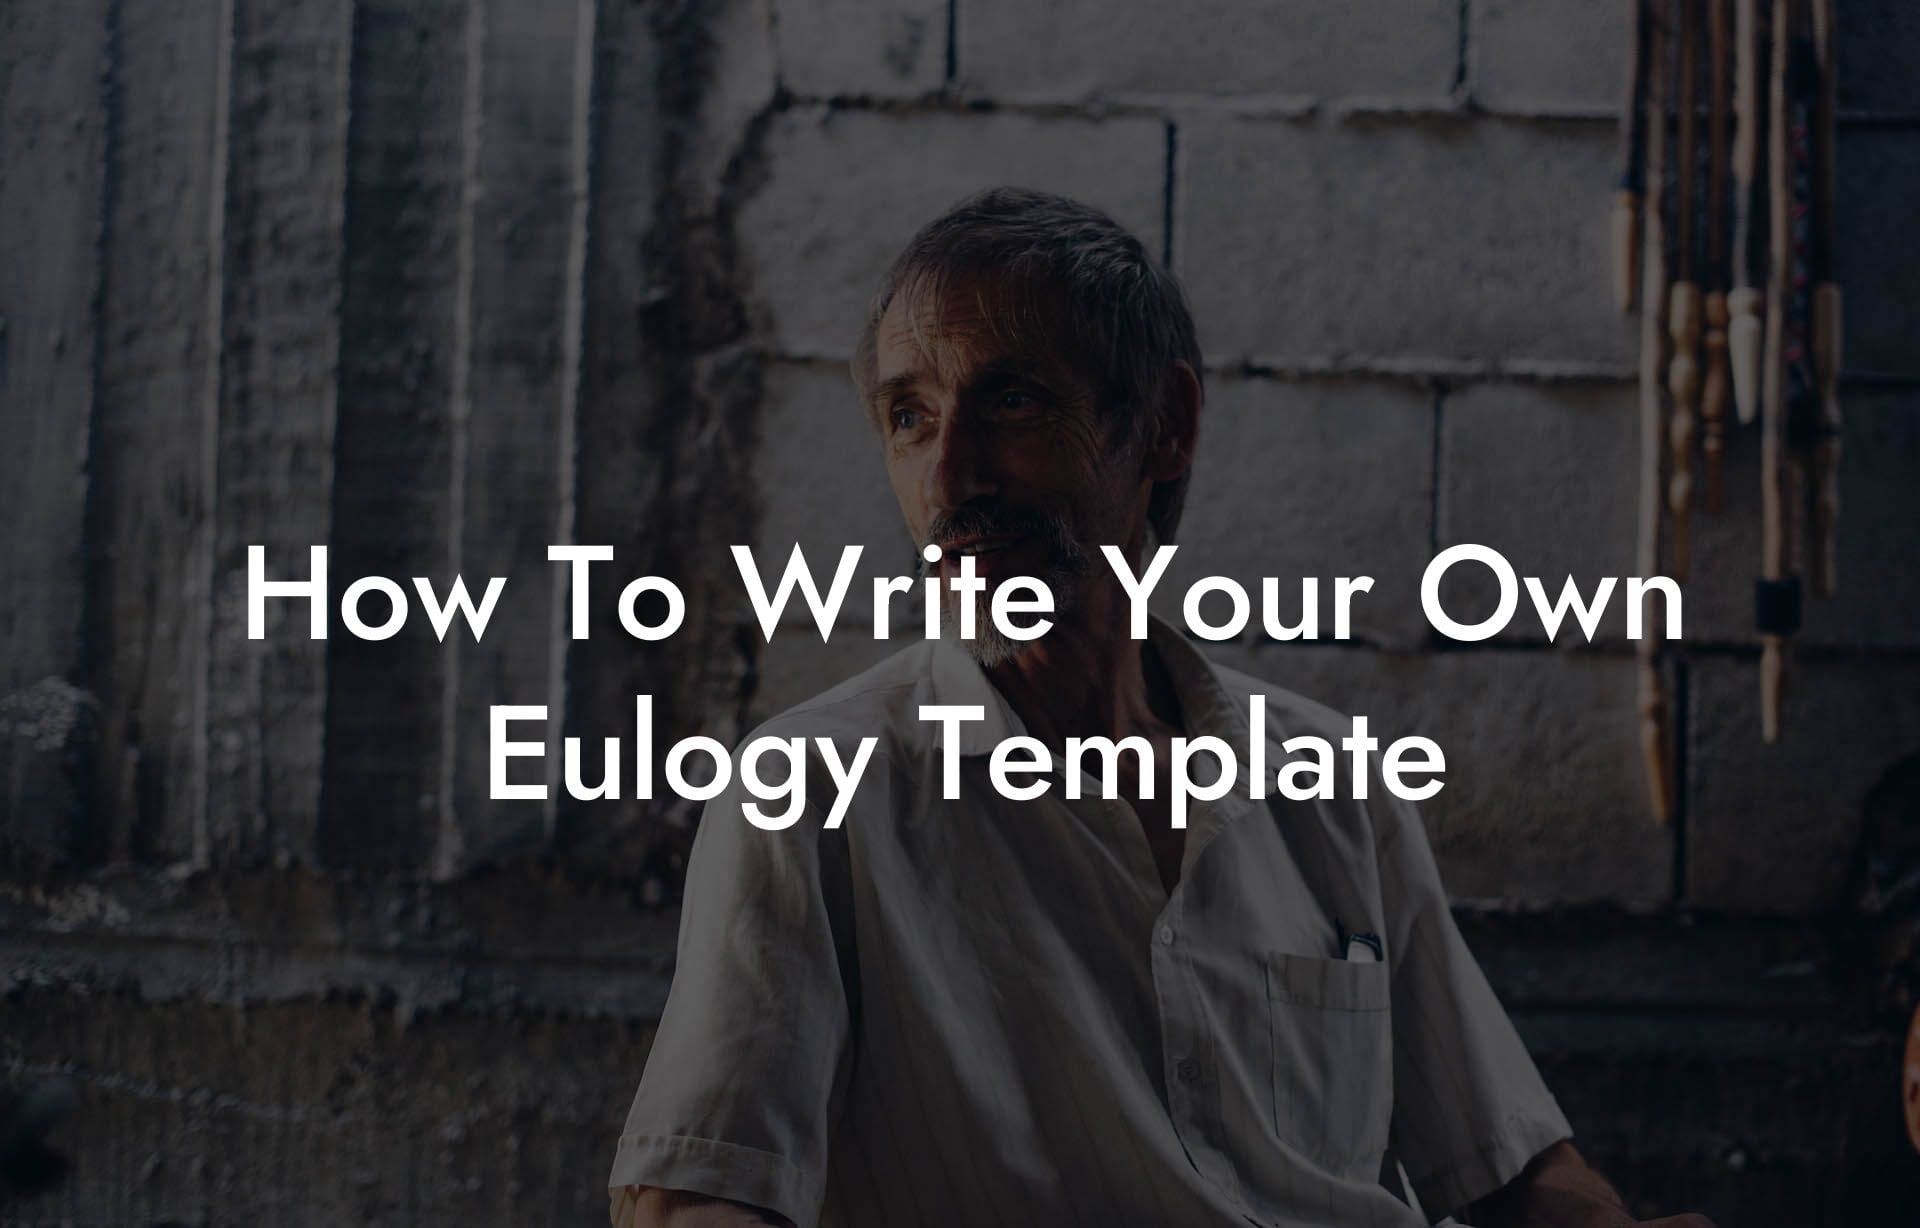 How To Write Your Own Eulogy Template